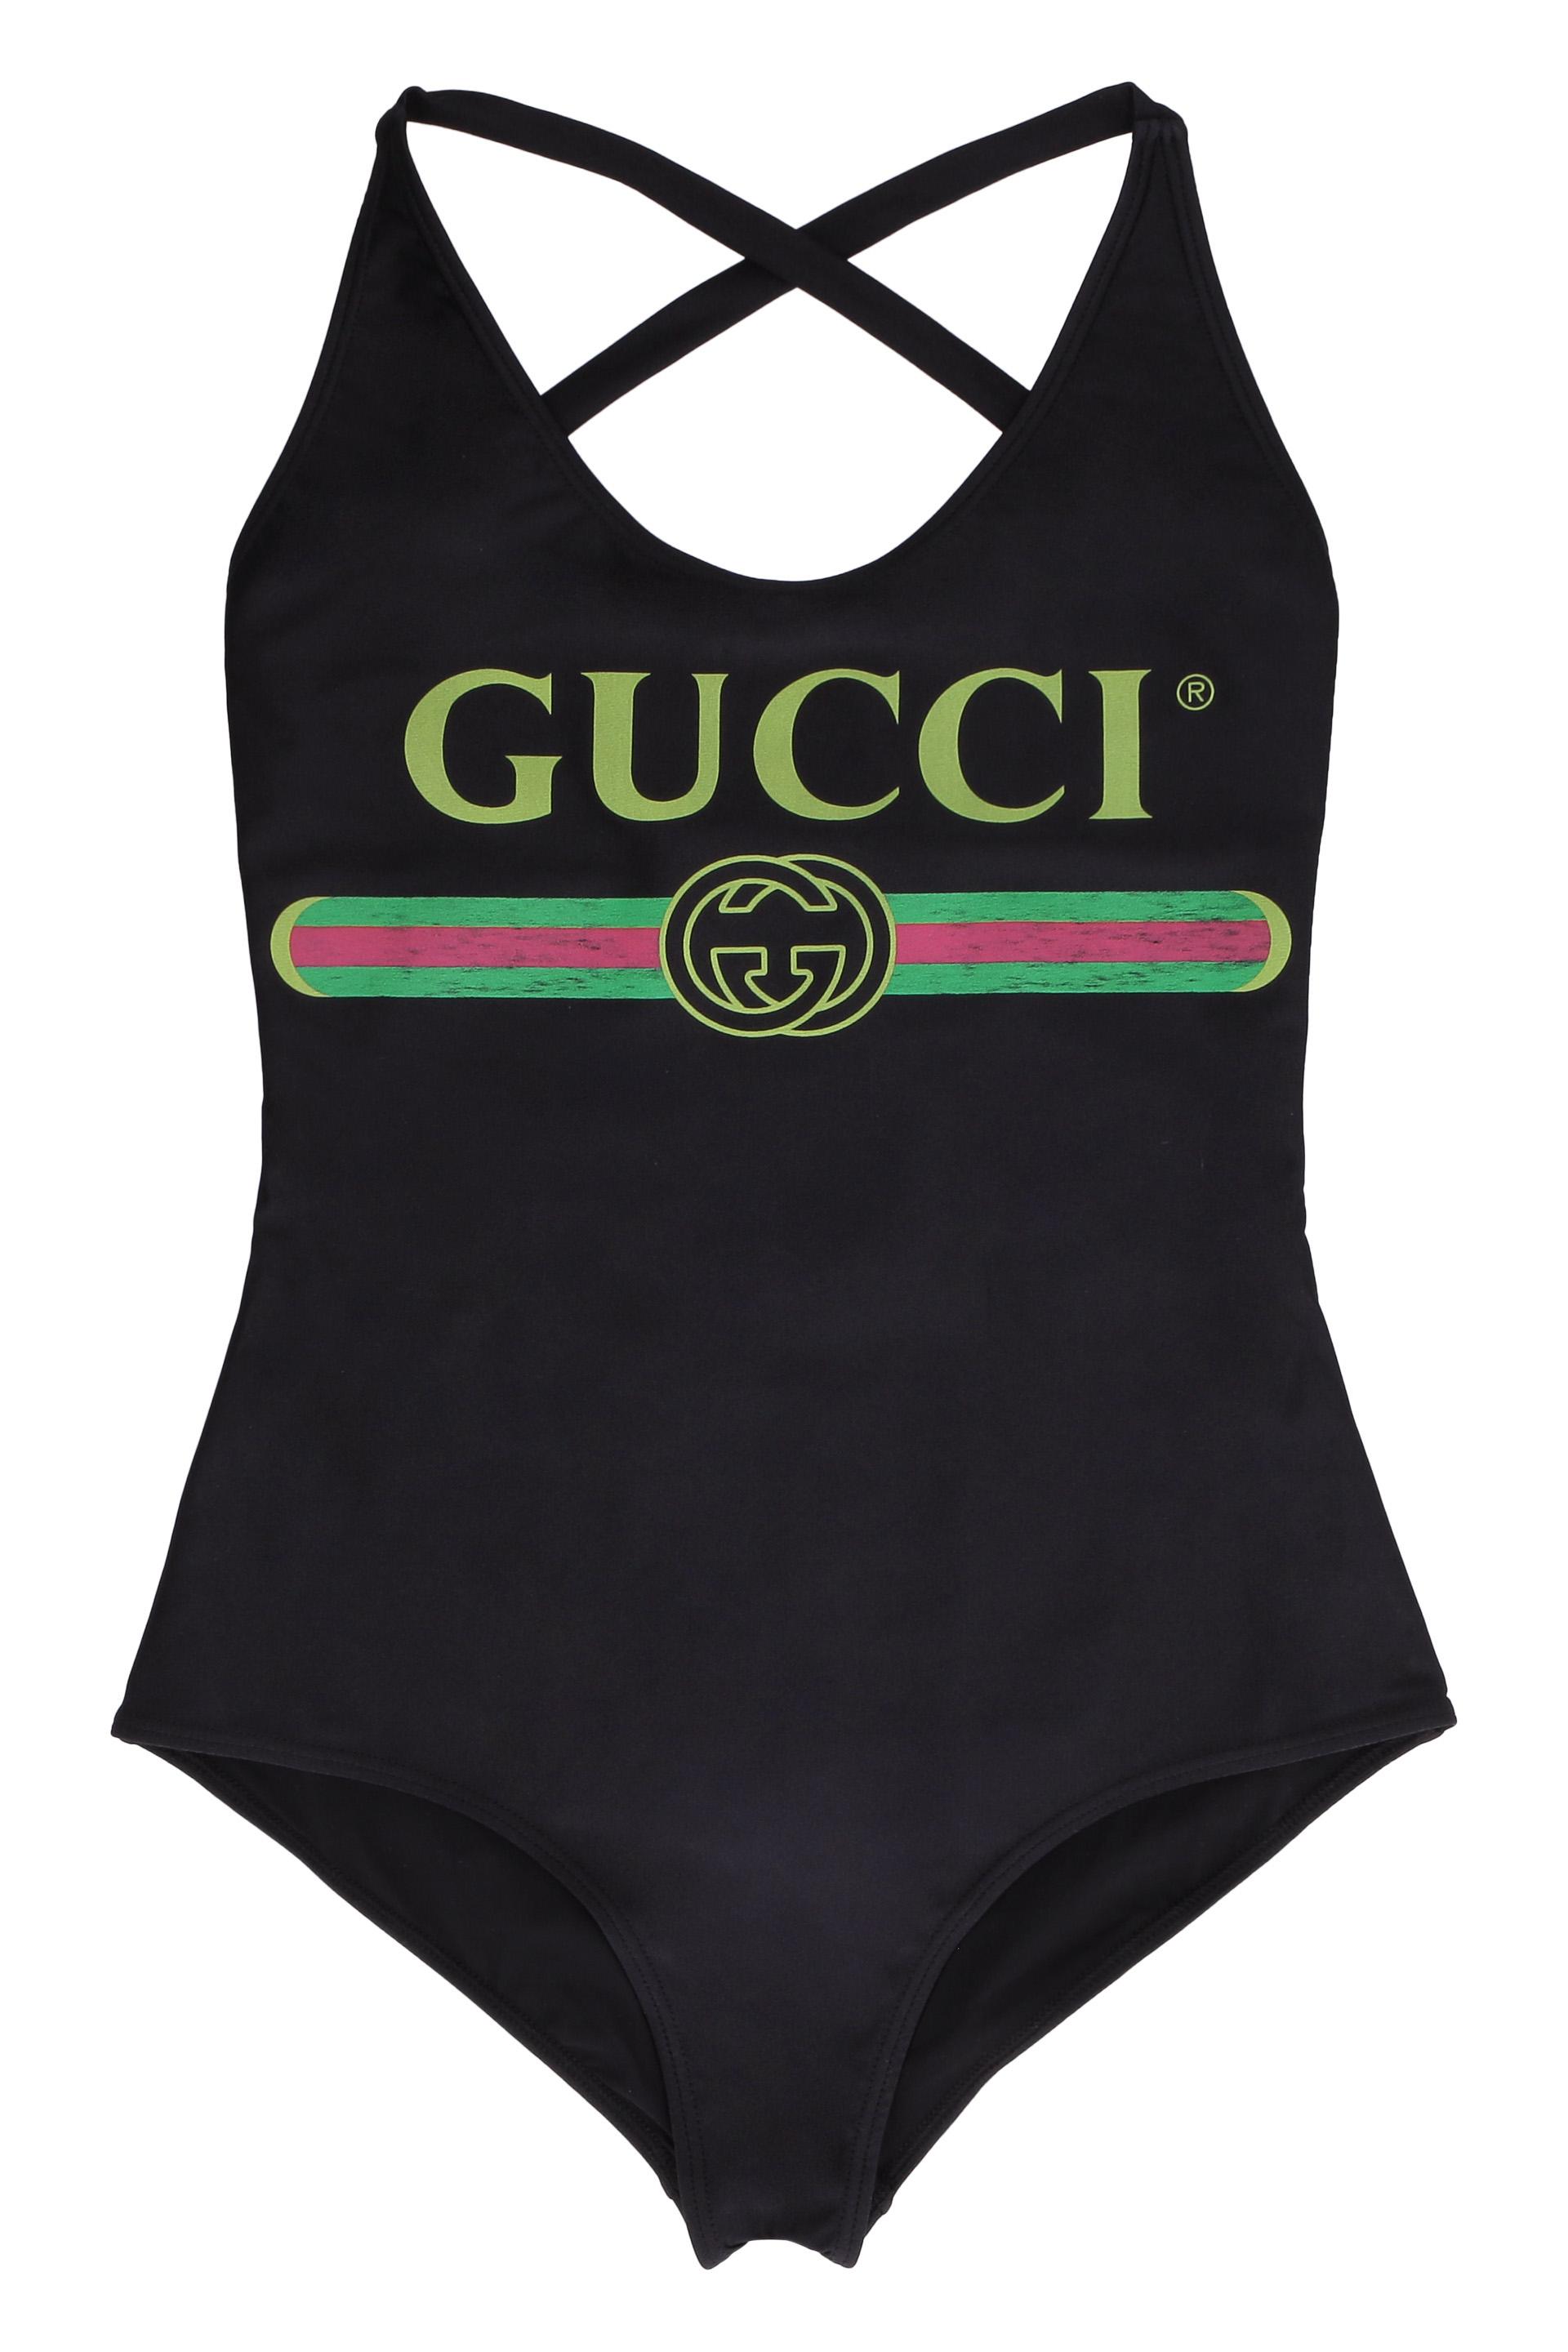 Gucci Print One-piece Swimsuit in Black | Lyst